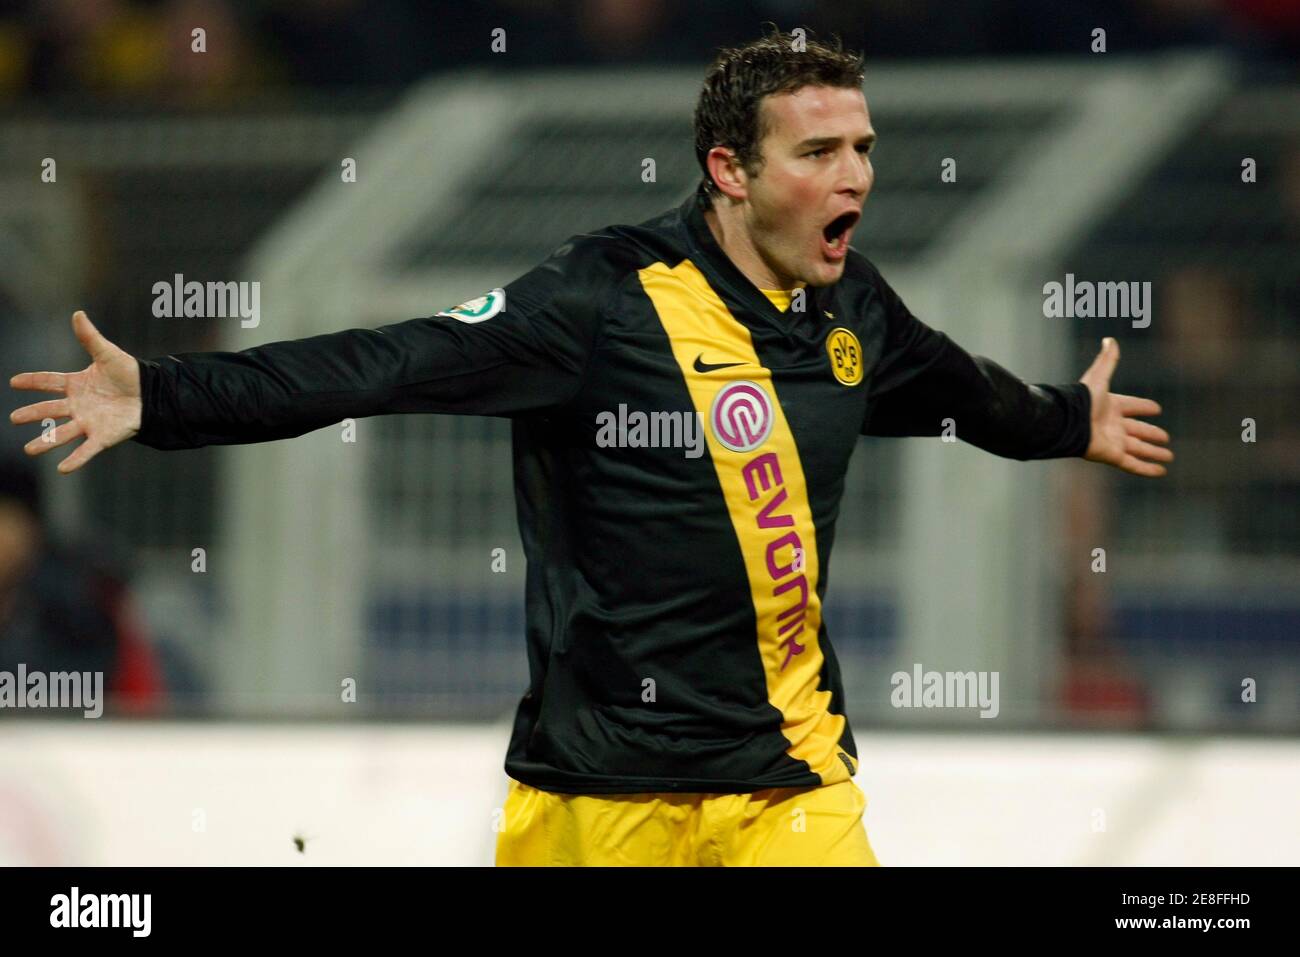 Borussia Dortmund's Alexander Frei of Switzerland celebrates a goal against  Werder Bremen during the German soccer cup "DFB-Pokal" round of 16 match in  Dortmund January 28, 2009. REUTERS/Ina Fassbender (GERMANY Stock Photo -